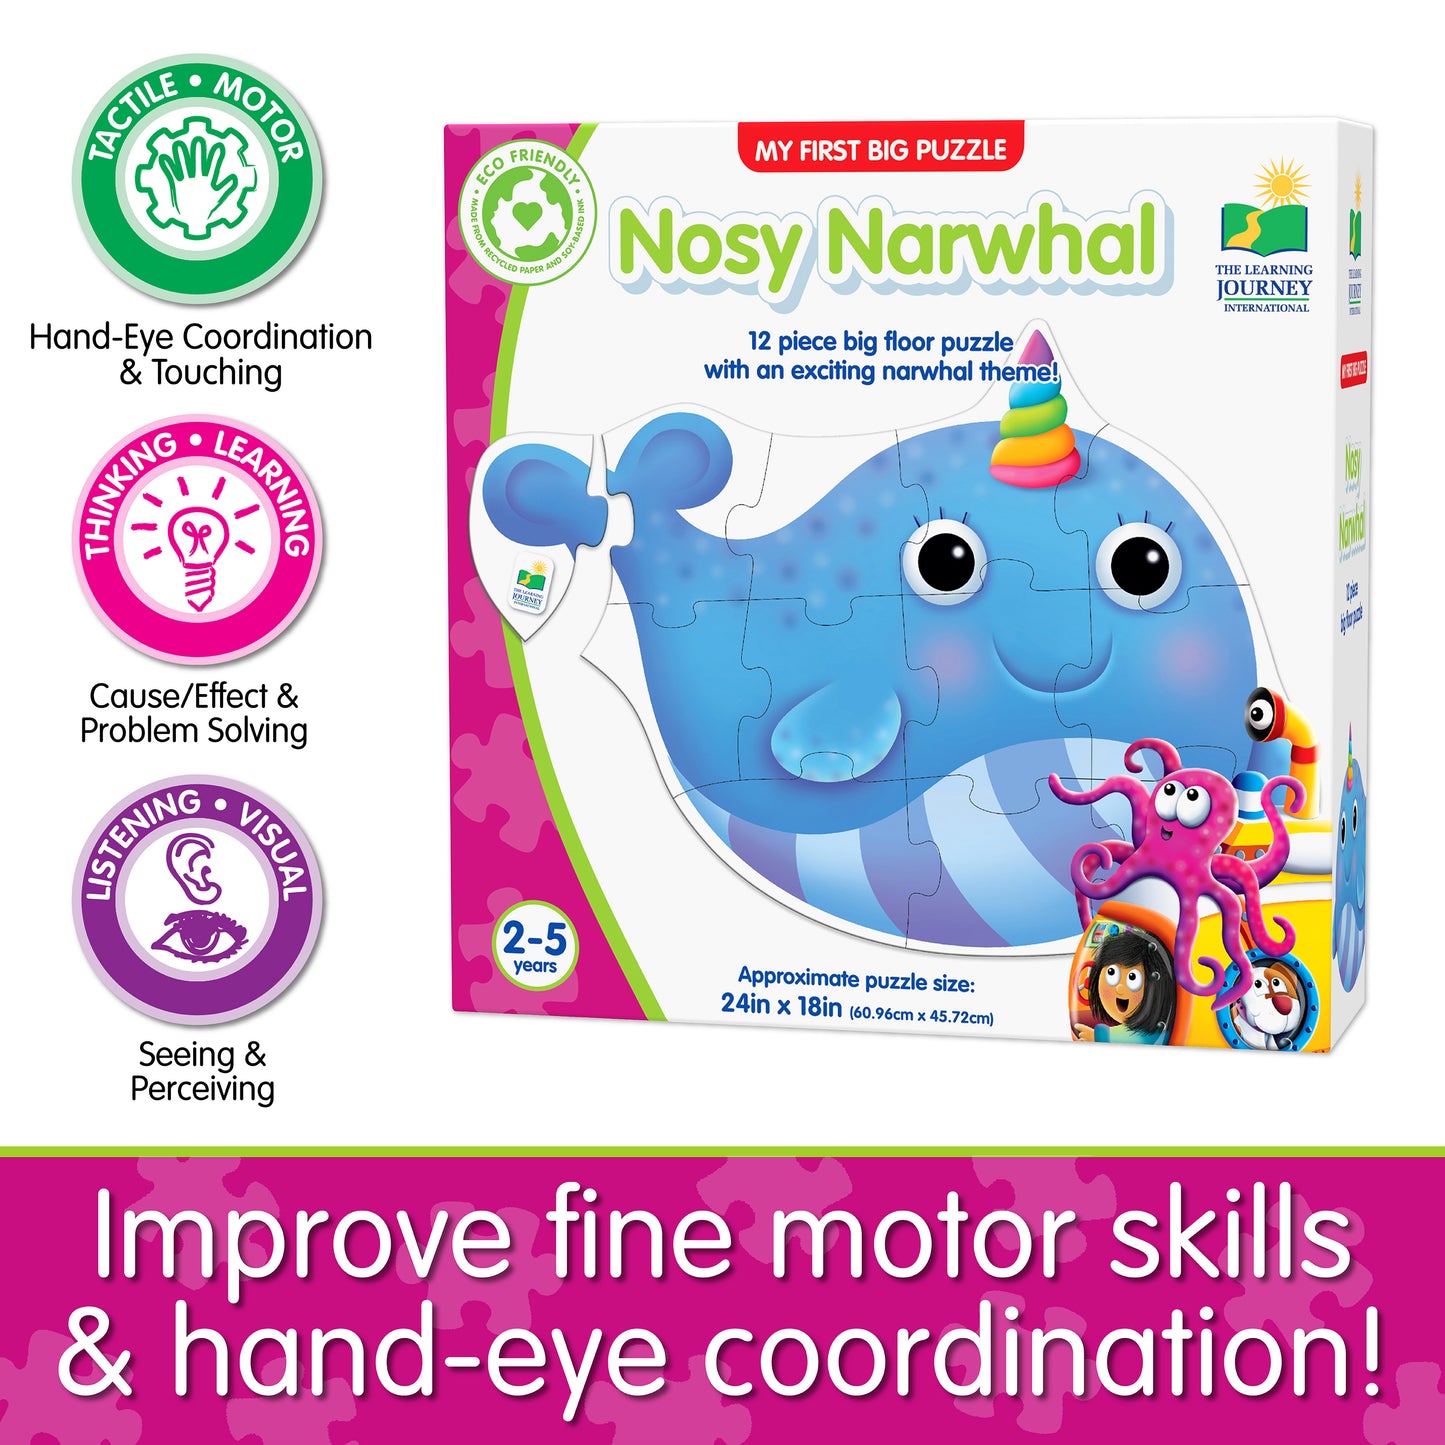 Infographic about My First Big Puzzle - Nosy Narwhal's educational benefits that says, "Improve fine motor skills and hand-eye coordination!"